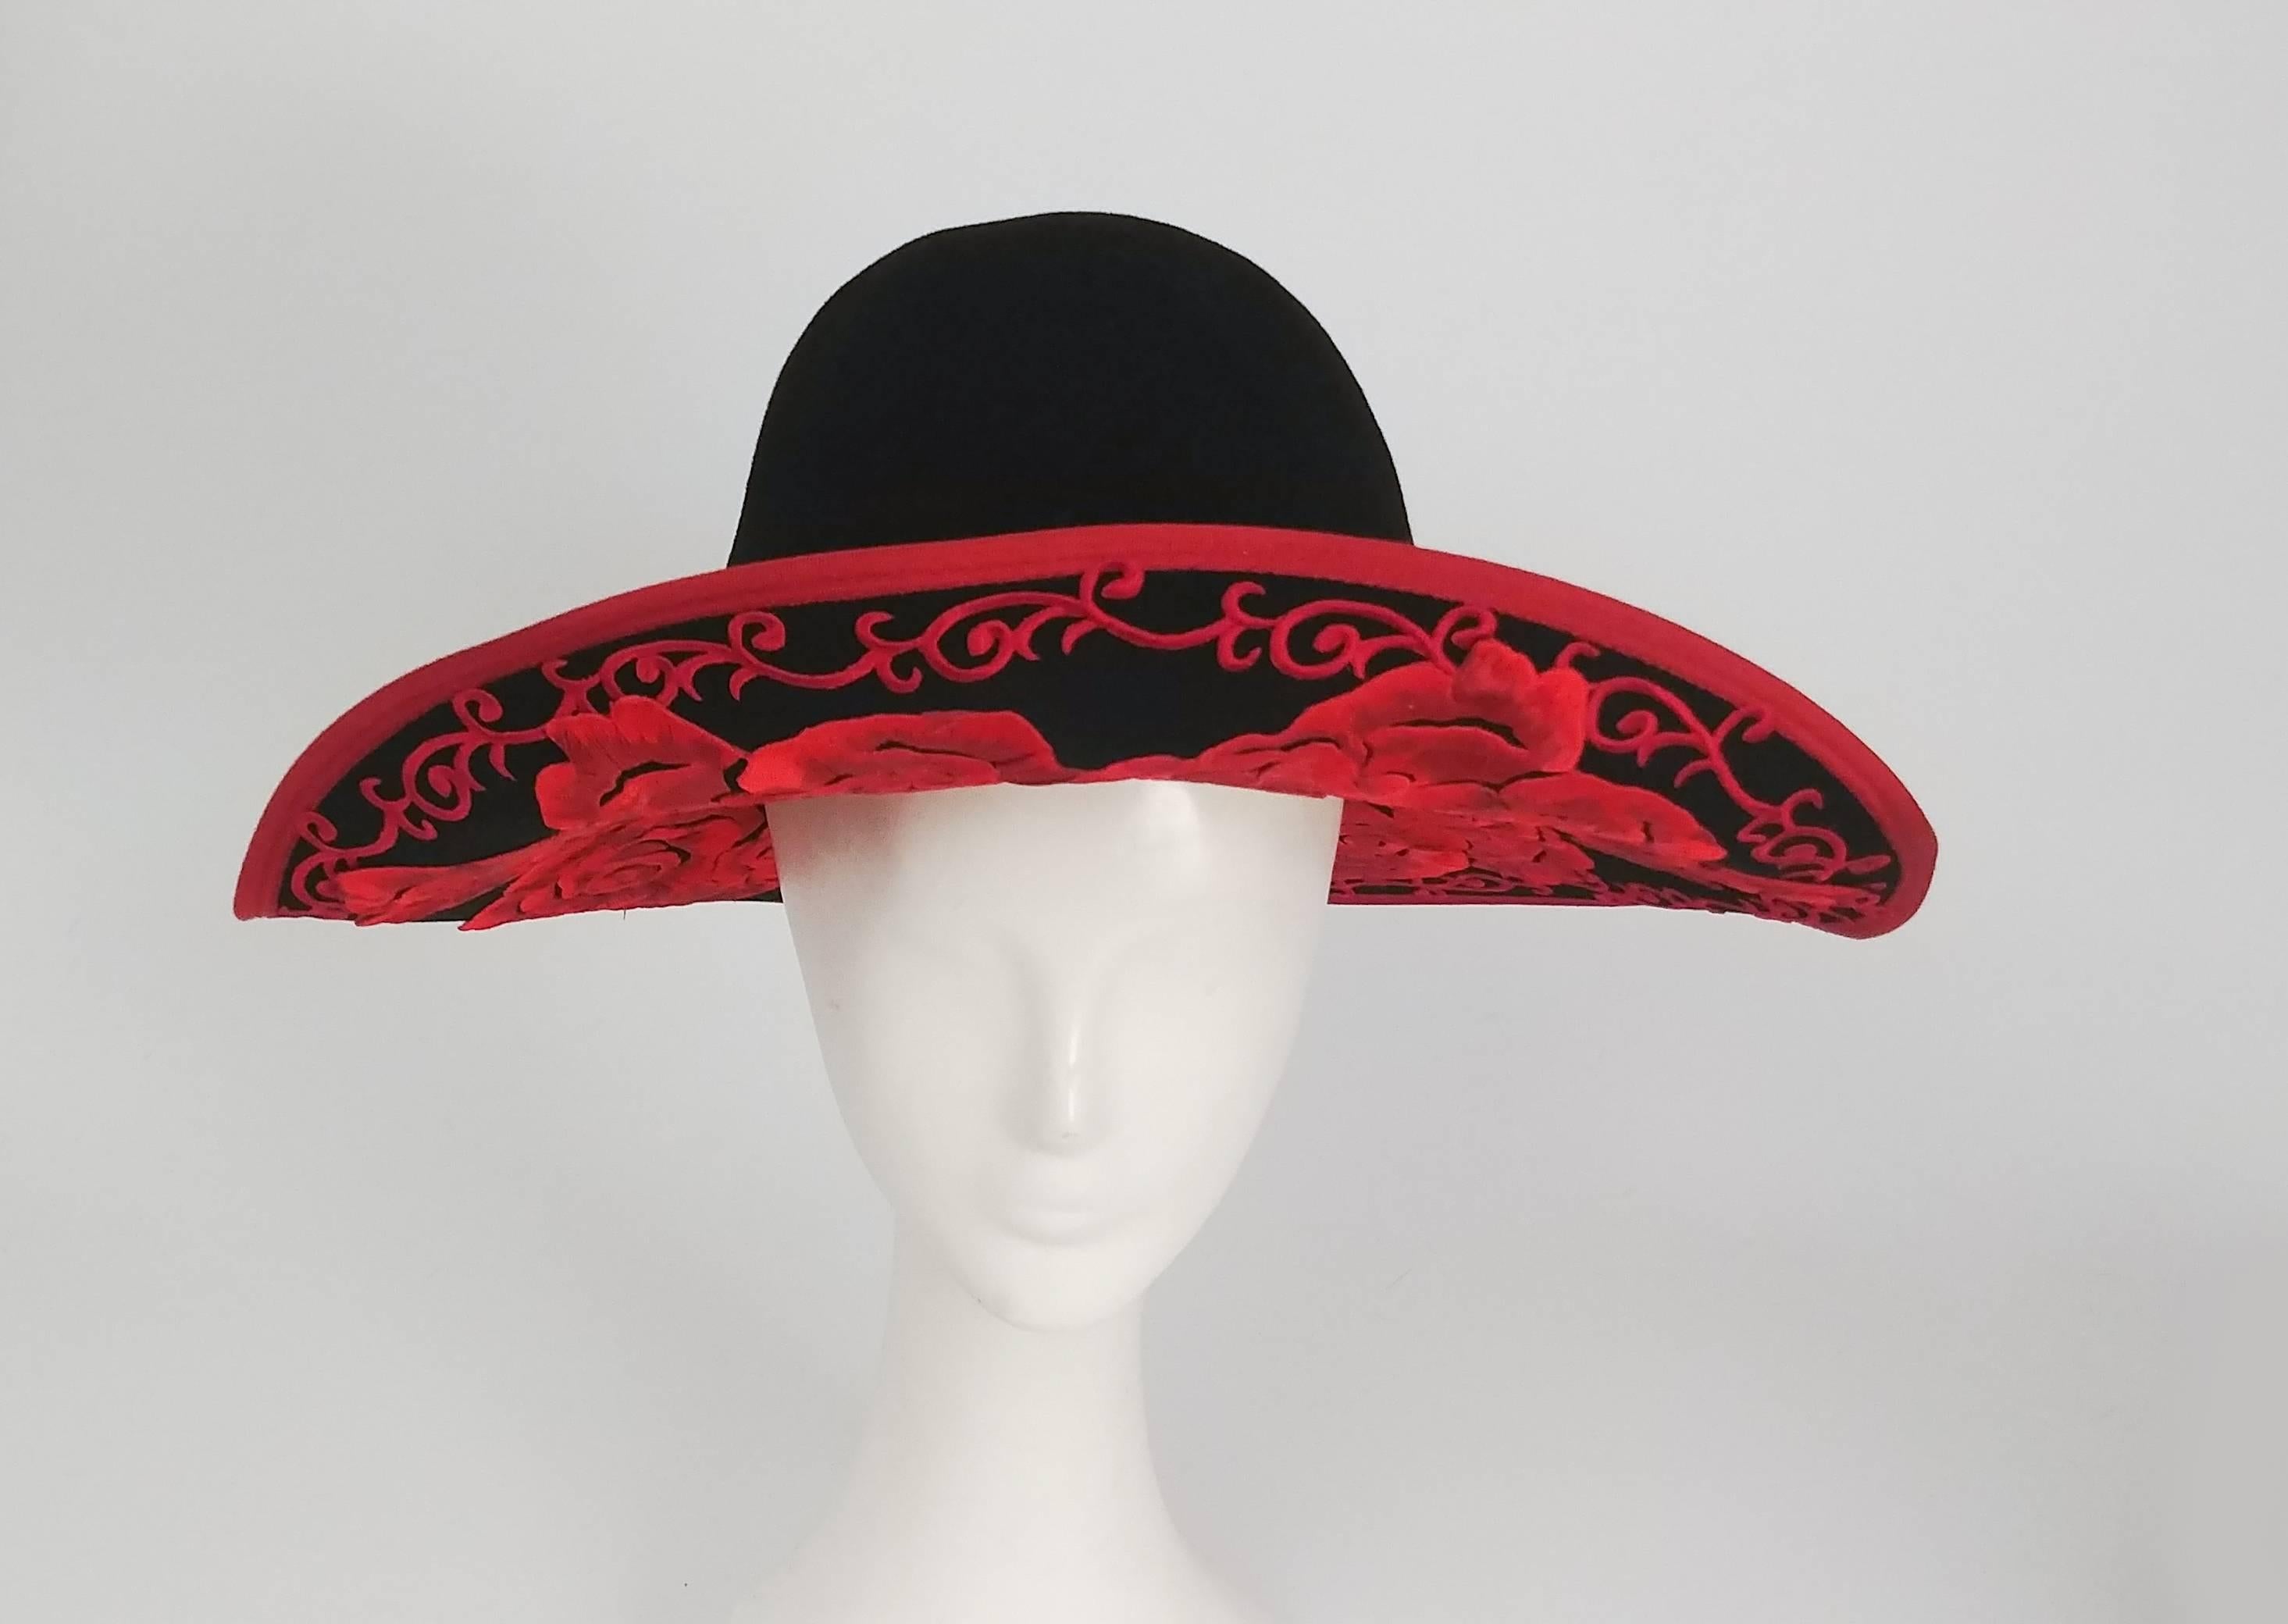 1980s Kokin Black Wide Brim Hat w/ Red Embroidered Roses. Wire brim allows for wearer to position brim easily. 